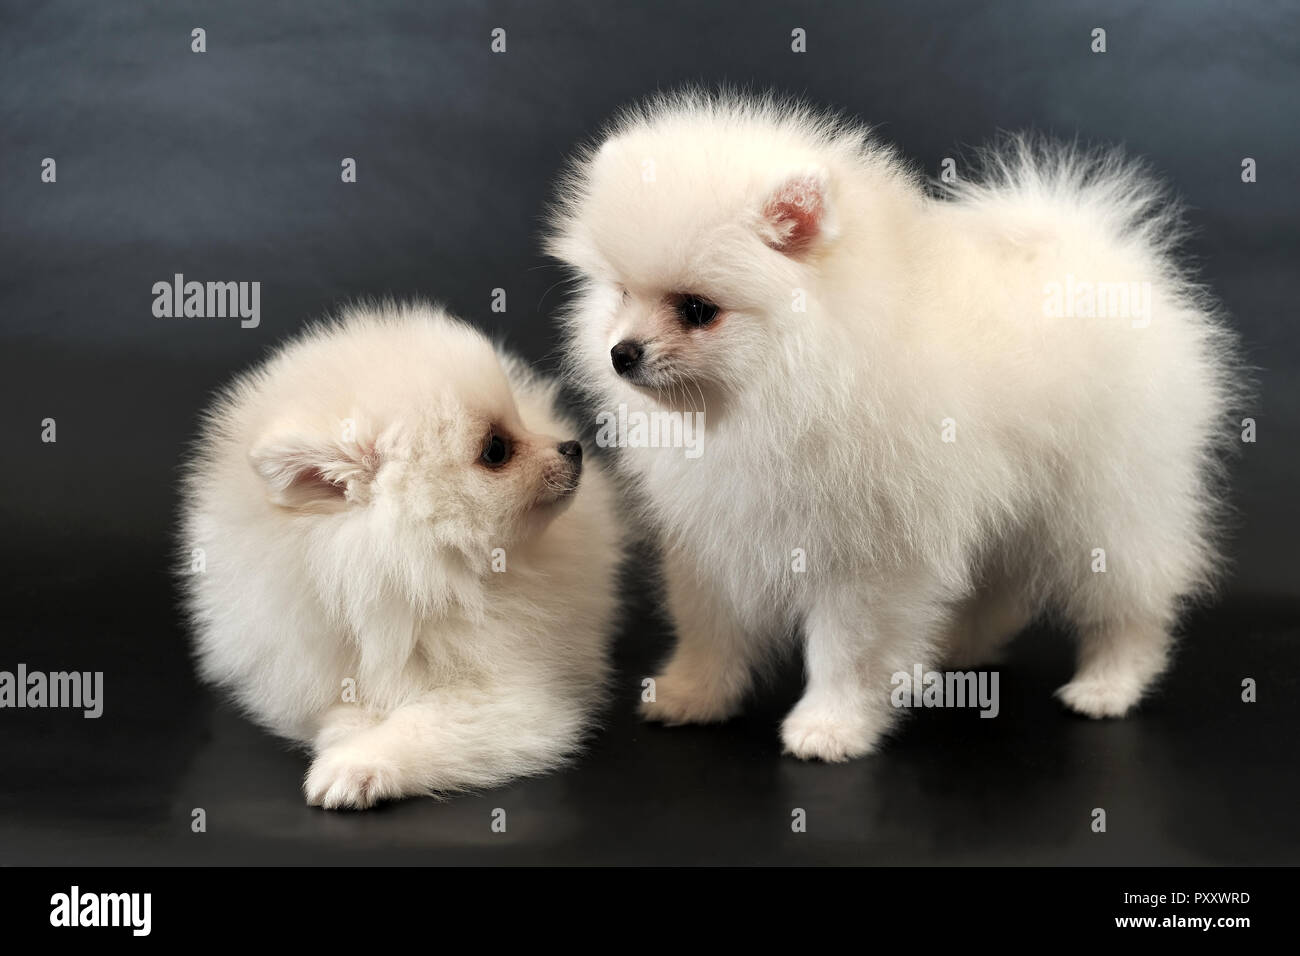 Pair of long haired white Pomeranian Spitz puppies Stock Photo